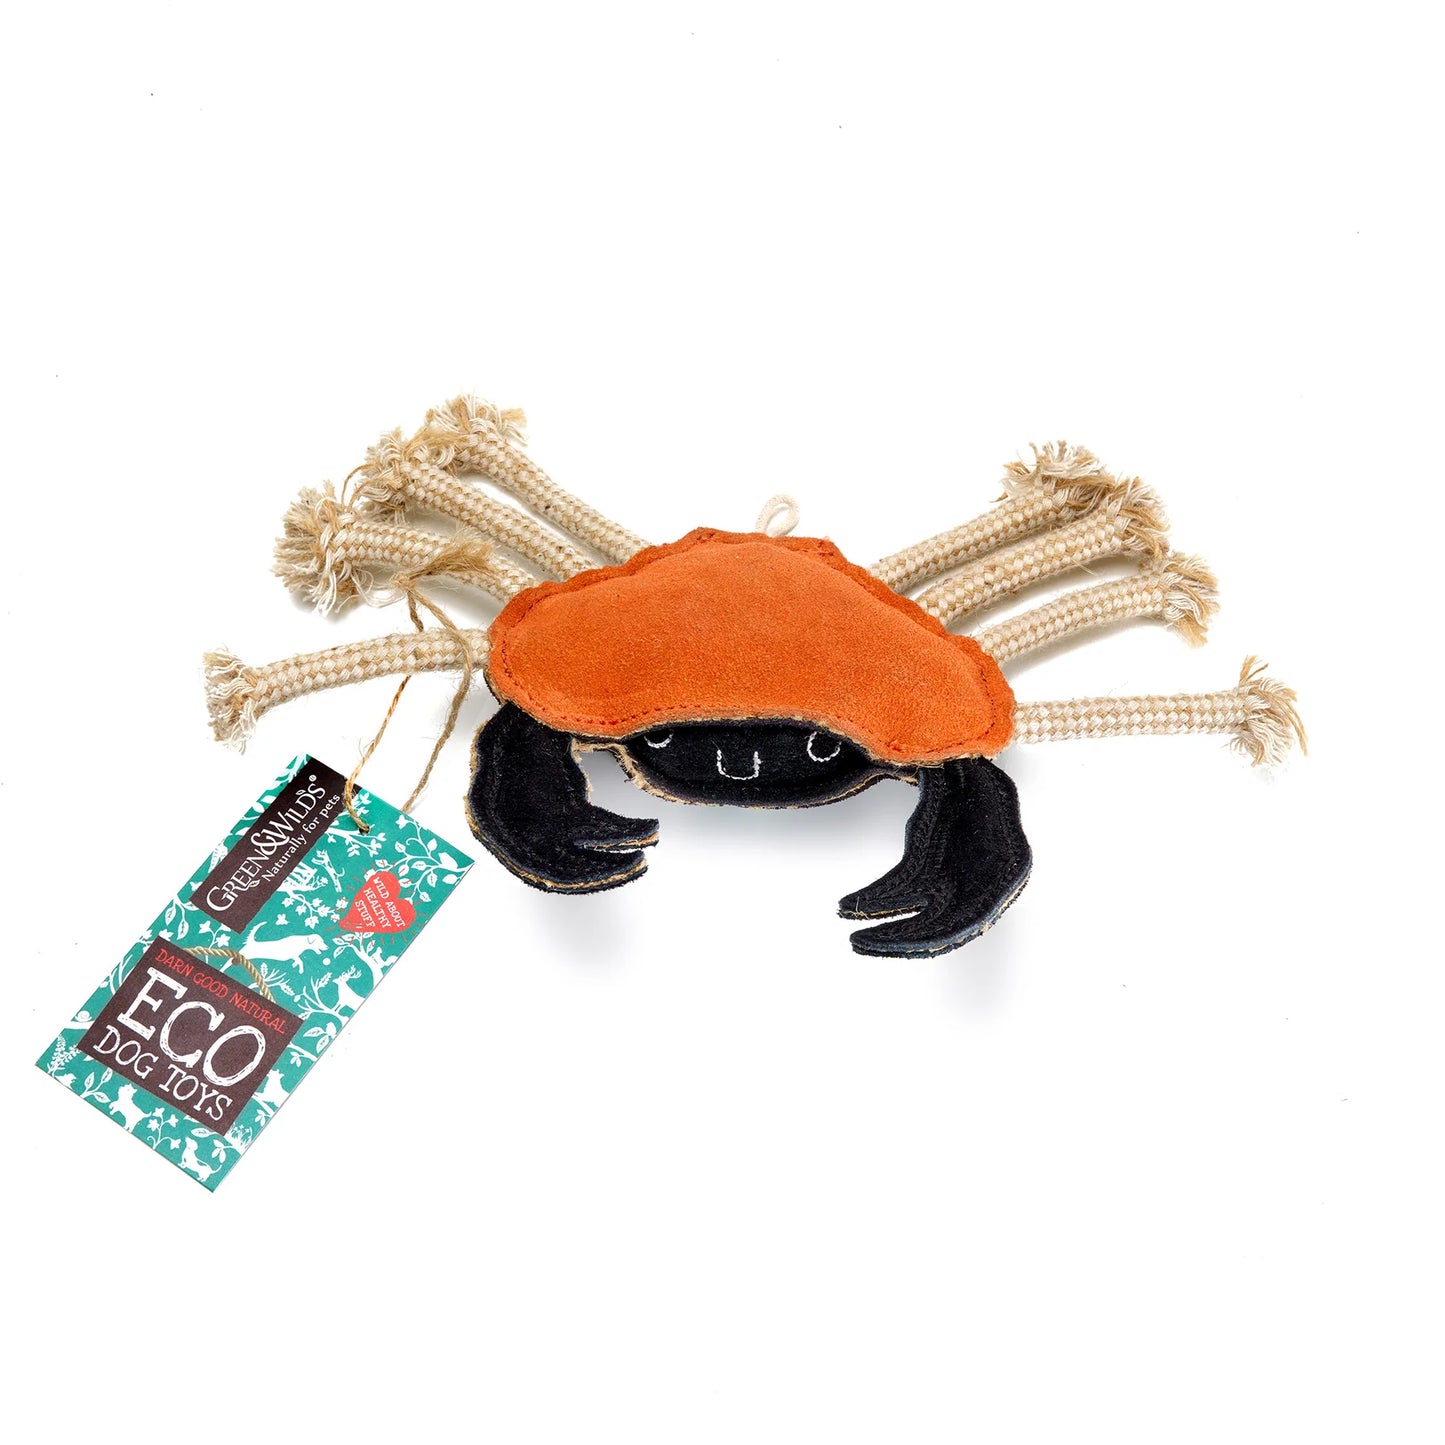 Green & Wilds Dog Toy: Carlos the Crab